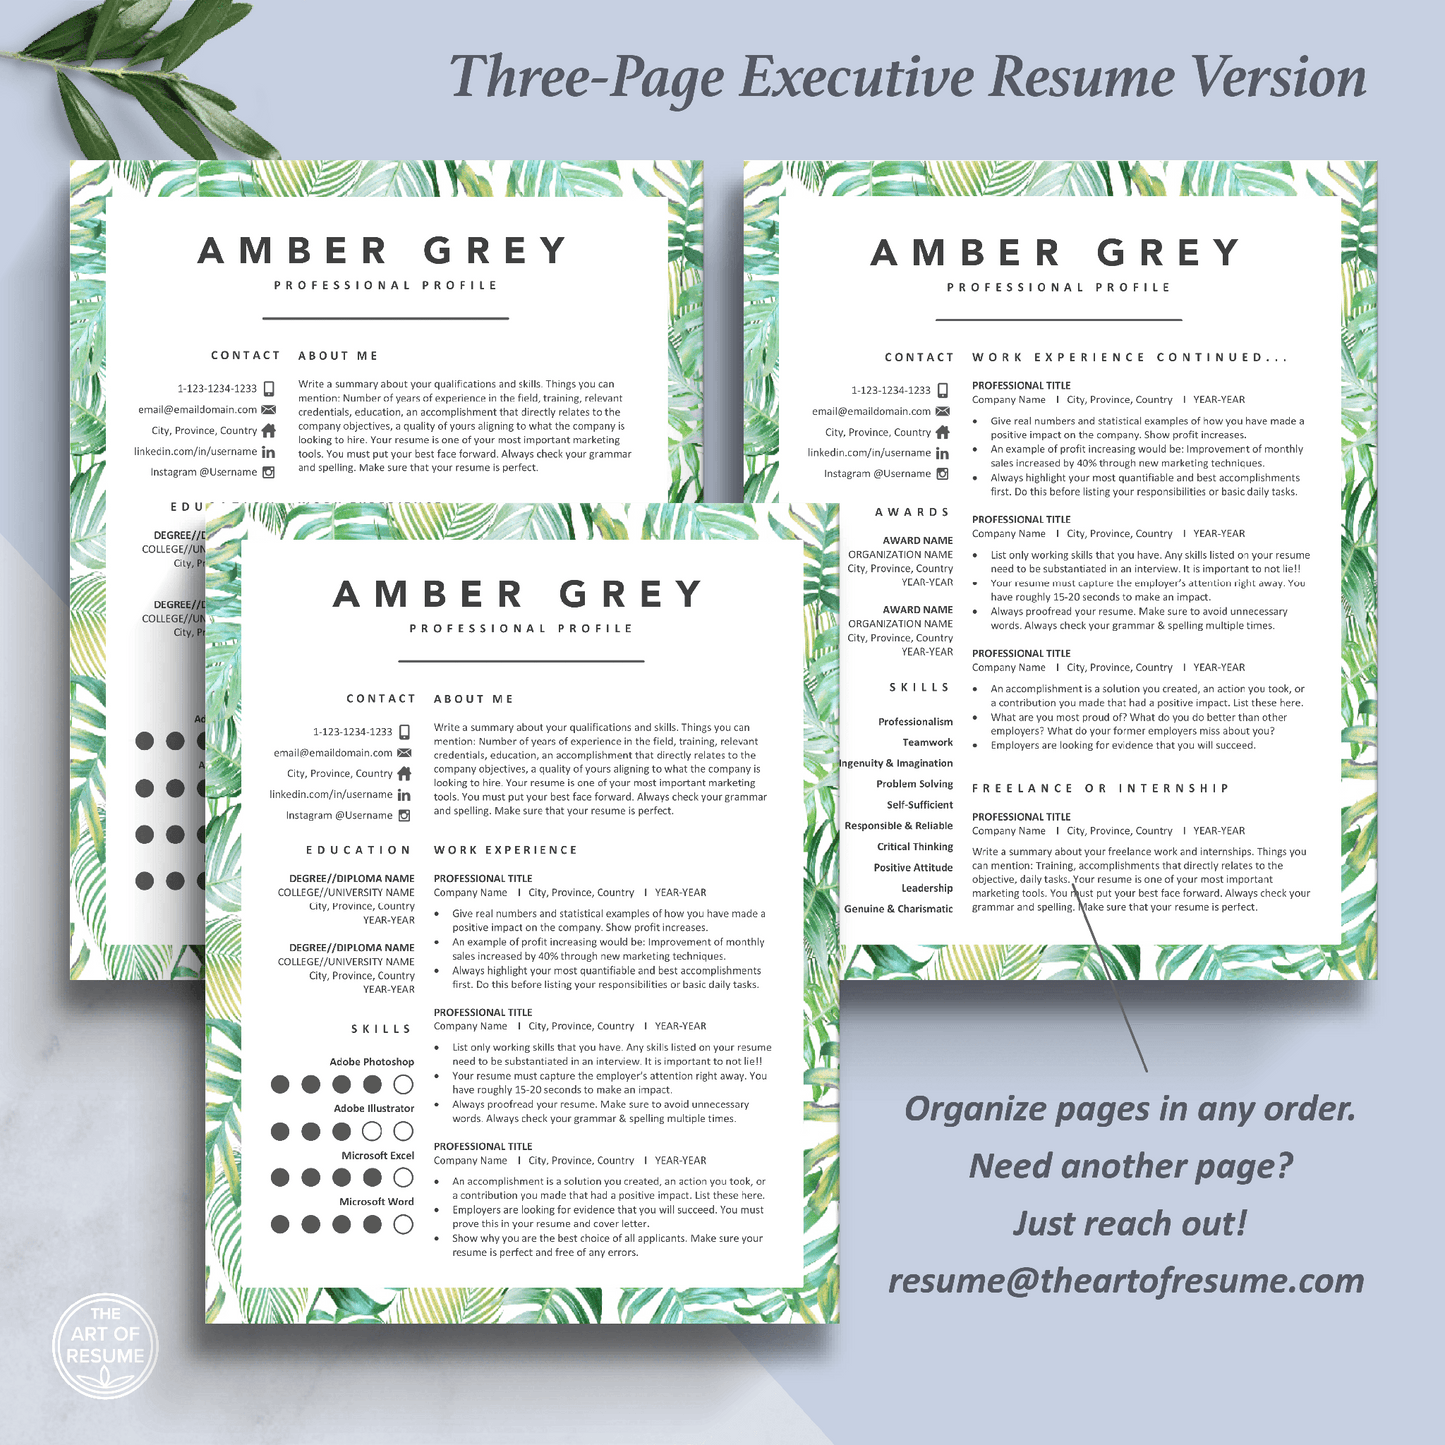 Creative CV Template Bundle | Floral Green Resume [Free Cover Letter]